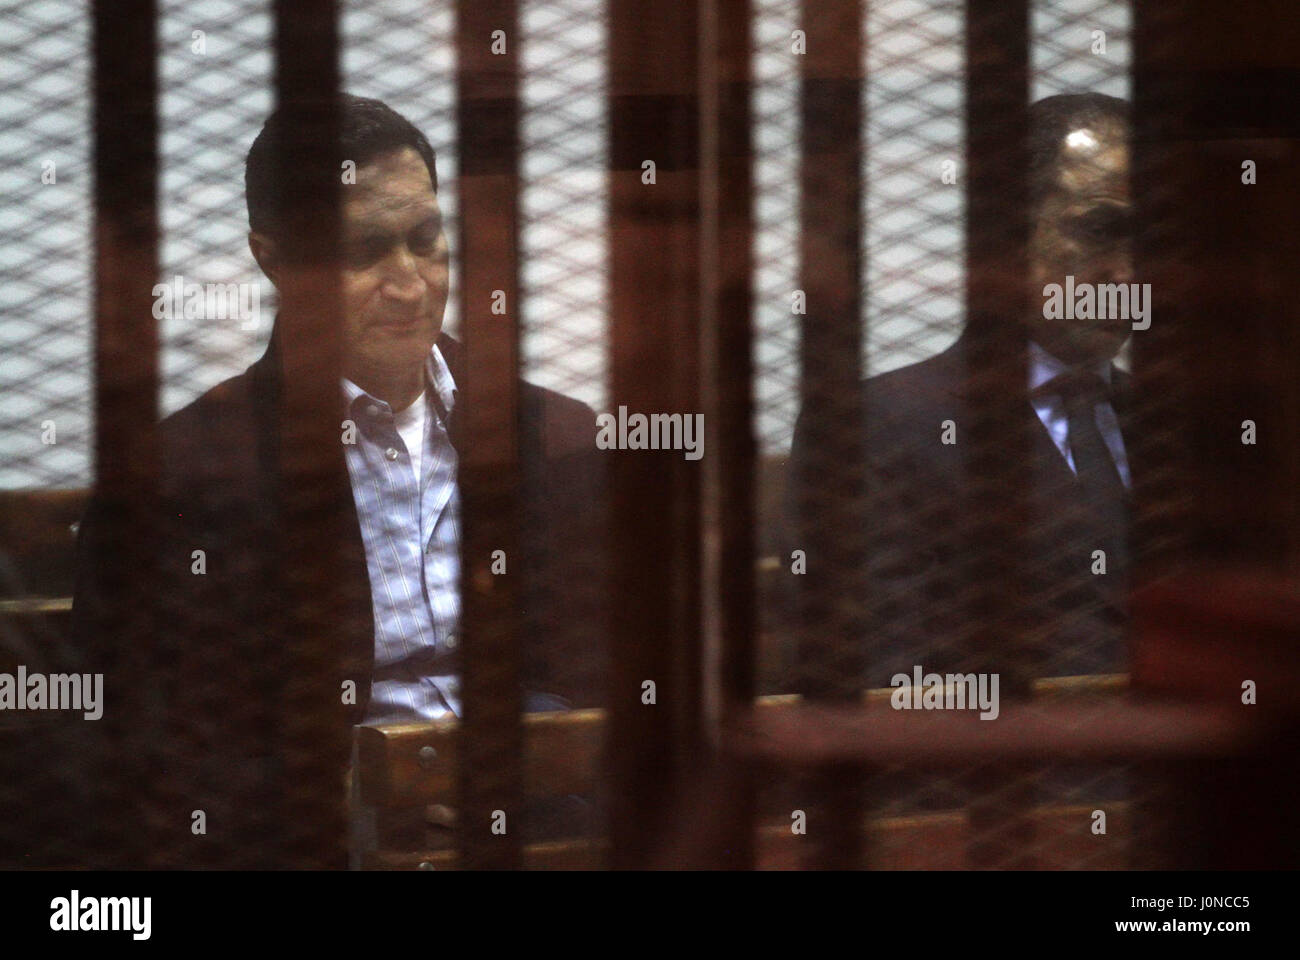 Cairo, Egypt. 15th Apr, 2017. Alaa and Gamal Mubarak, the sons of former president Hosni Mubarak sit in a courtroom cage during their trial in ''Stock Market Manipulation'' case, in Cairo. Credit: ZUMA Press, Inc./Alamy Live News Stock Photo